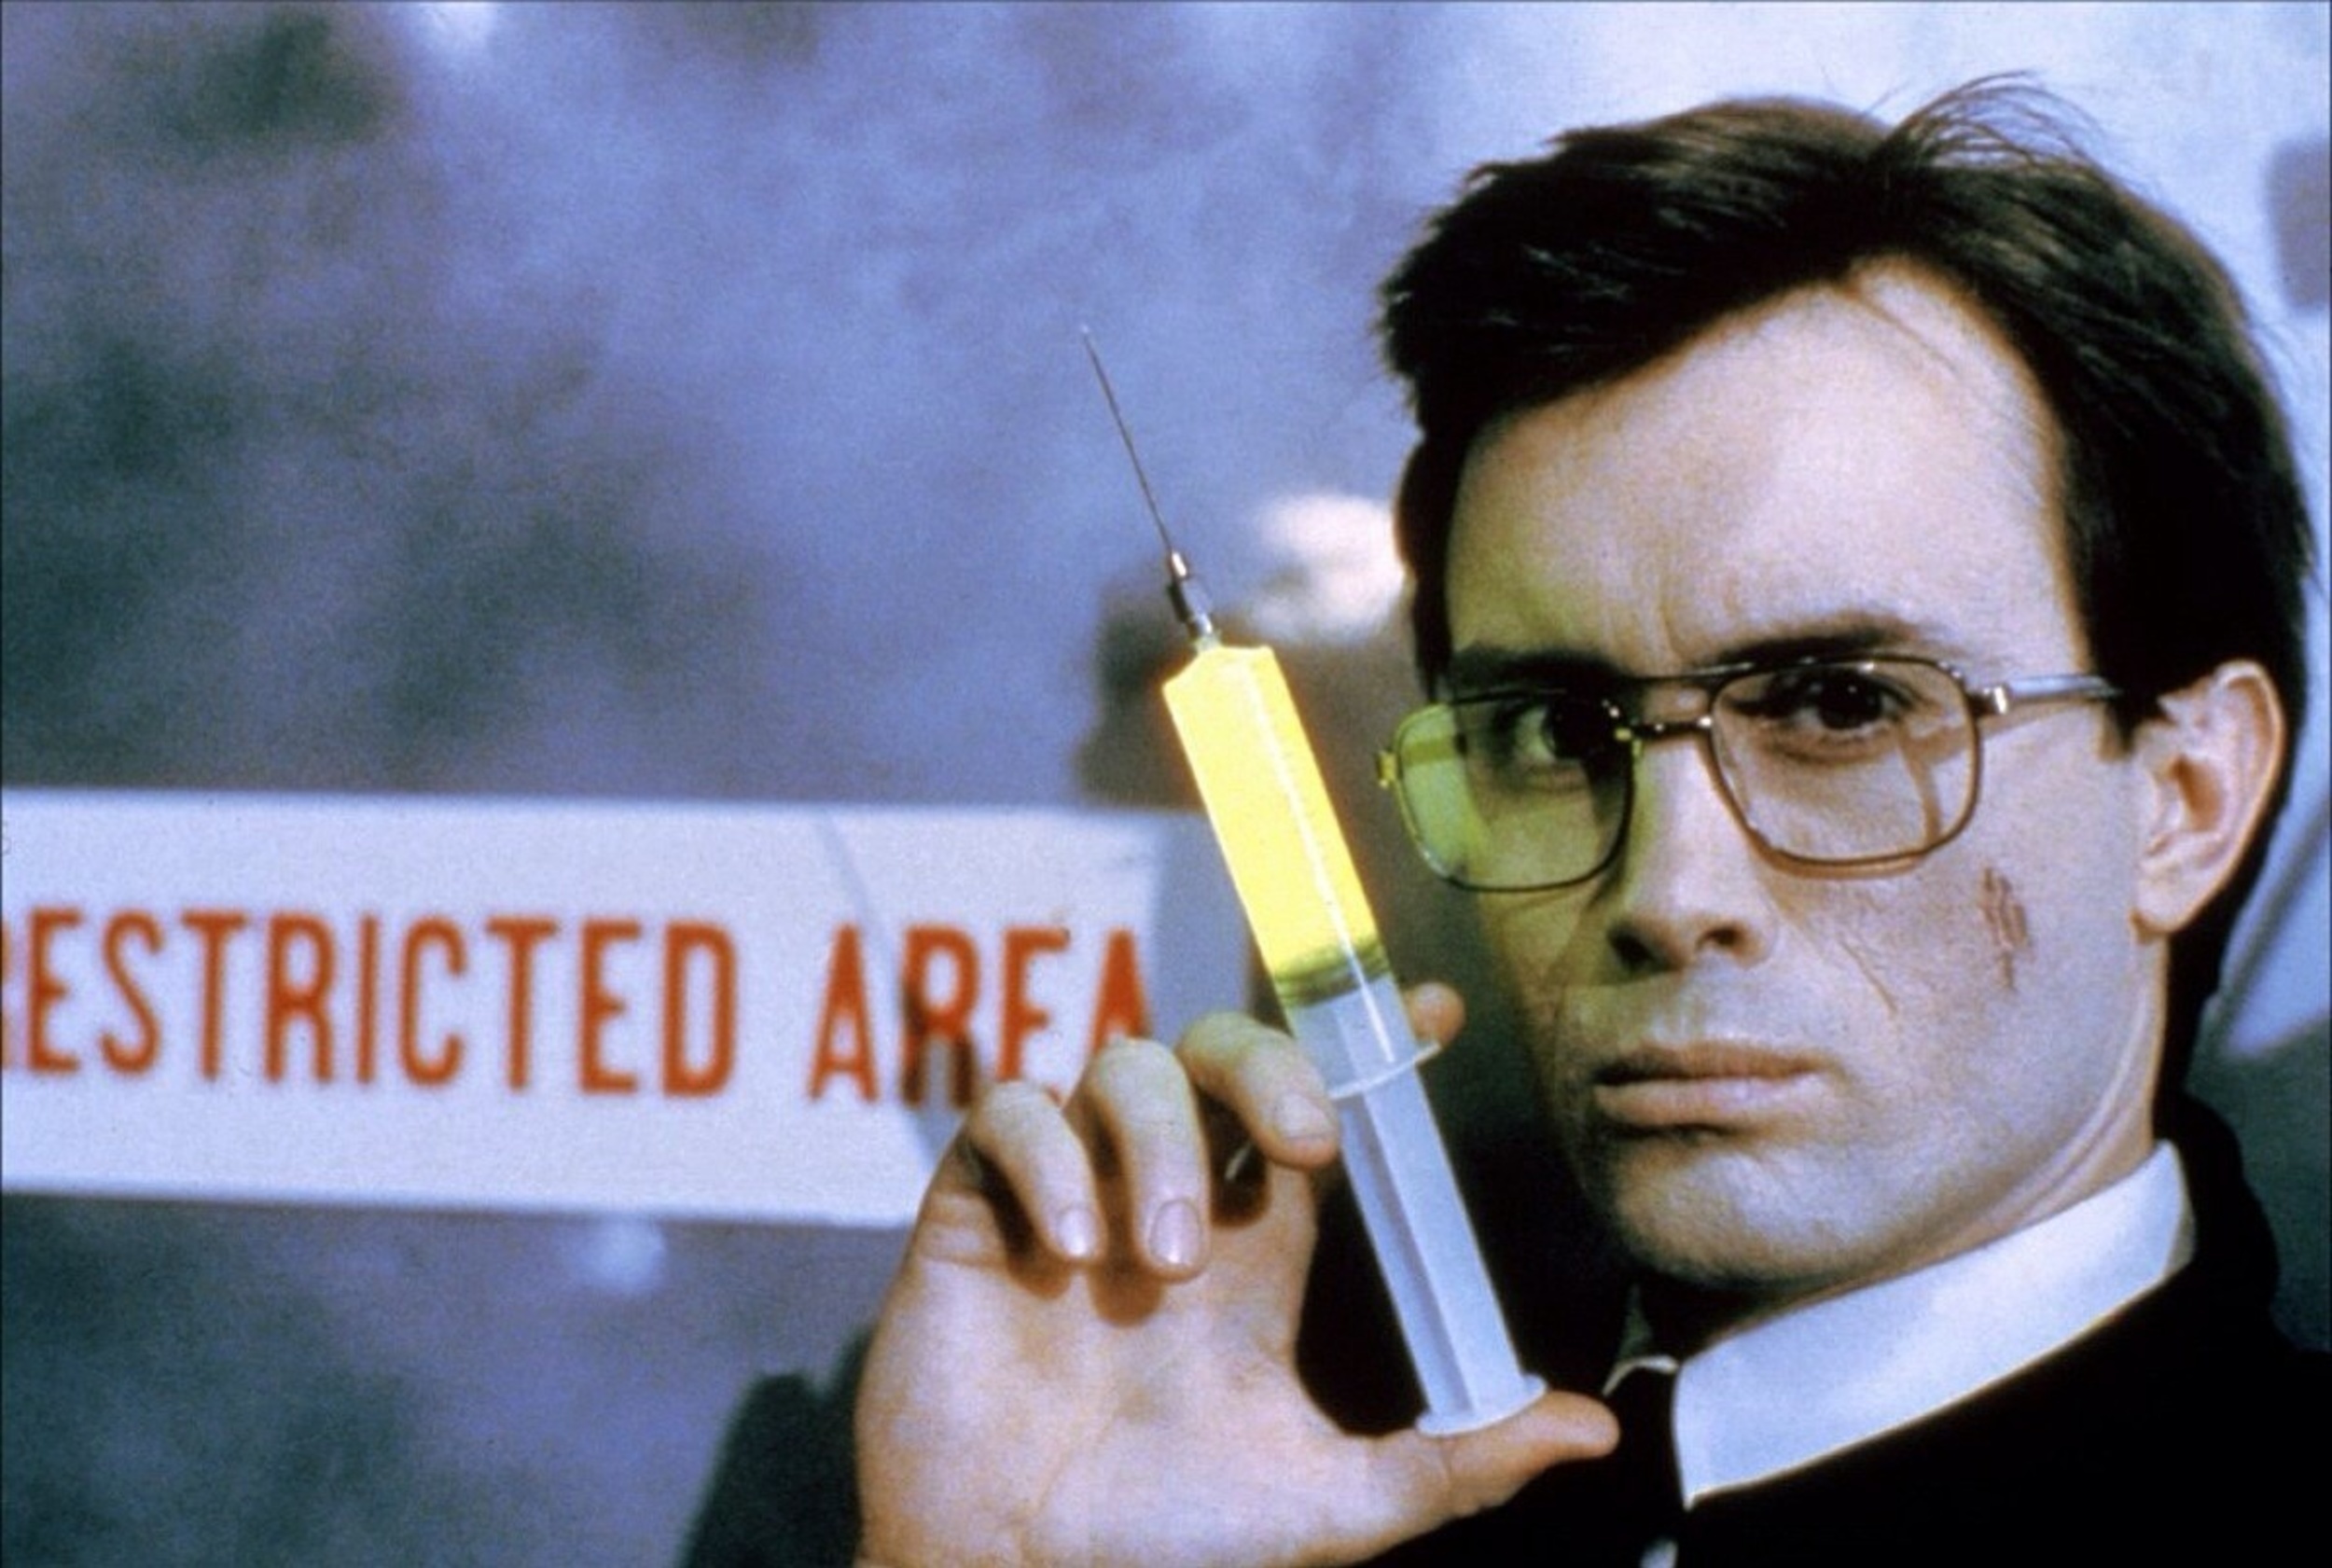 <p>Stuart Gordon’s Grand Guignol take on H.P. Lovecraft’s short story “Herbert West – Re-Animator” is a gore-drenched hoot starring Jeffrey Combs as the titular medical student who’s developed a reagent that brings the dead back to life. The only problem is that the dead aren’t quite who they once were and aren’t terribly pleased to be back among the living. Brian Yuzna took over the directing reins for the sequels, “Bride of Re-Animator” and “Beyond Re-Animator," and placed a greater emphasis on the comedic elements. “Bride” is enjoyable, but “Beyond” is a waste of Combs’s deranged genius as West.</p><p><a href='https://www.msn.com/en-us/community/channel/vid-cj9pqbr0vn9in2b6ddcd8sfgpfq6x6utp44fssrv6mc2gtybw0us'>Follow us on MSN to see more of our exclusive entertainment content.</a></p>